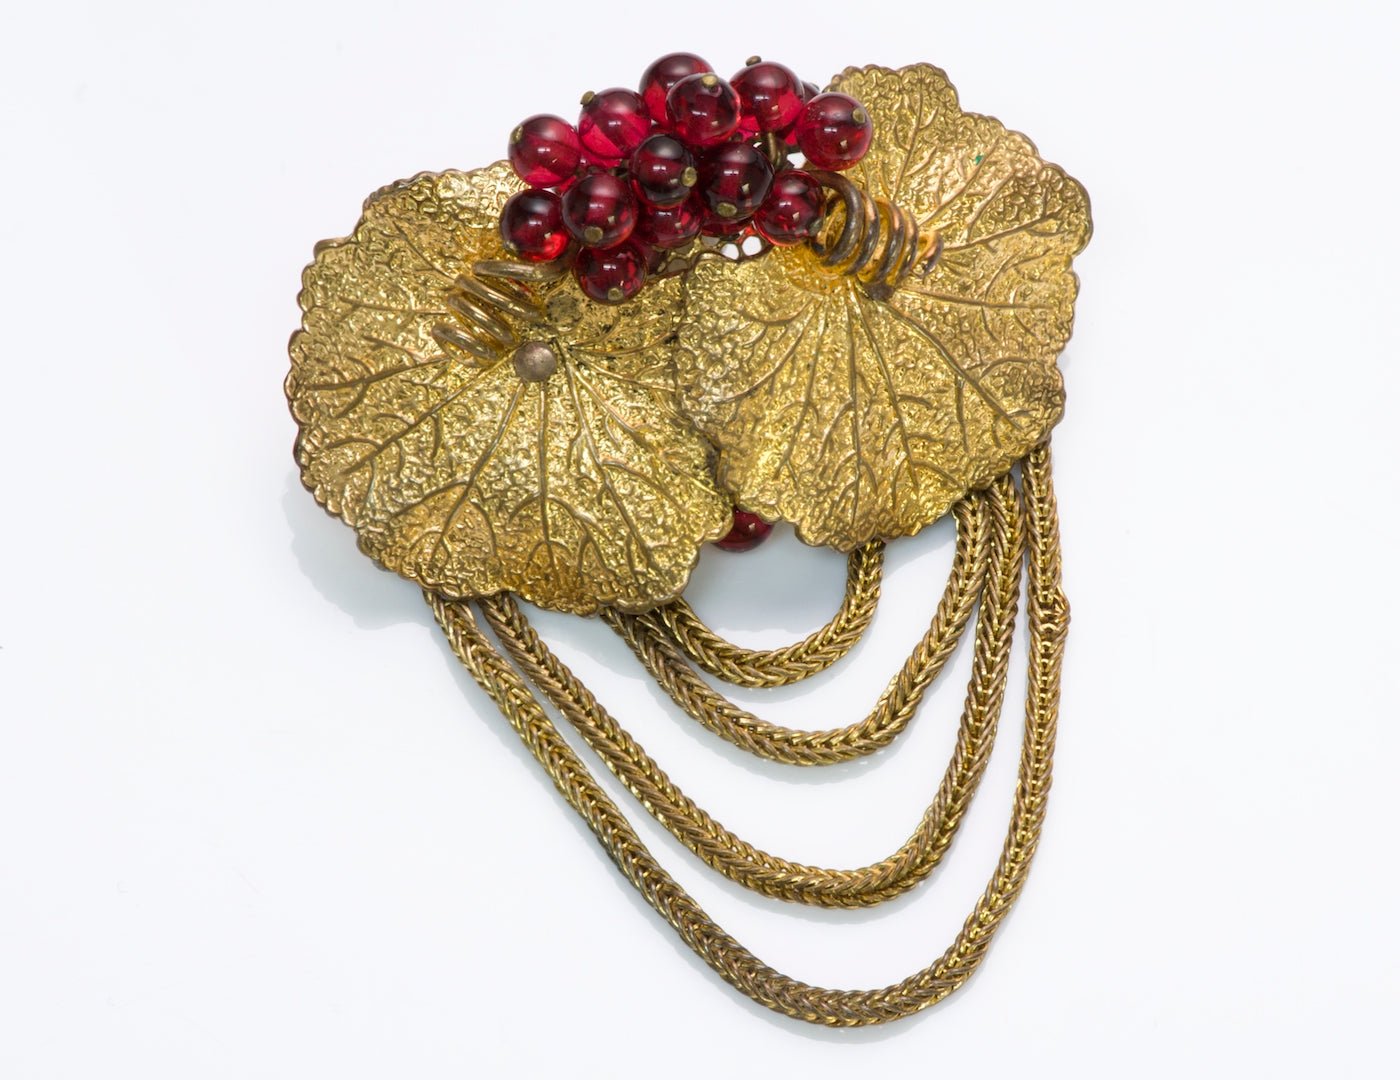 Vintage Louis Rousselet 1940's Gold Tone Glass Beads Leaf Brooch